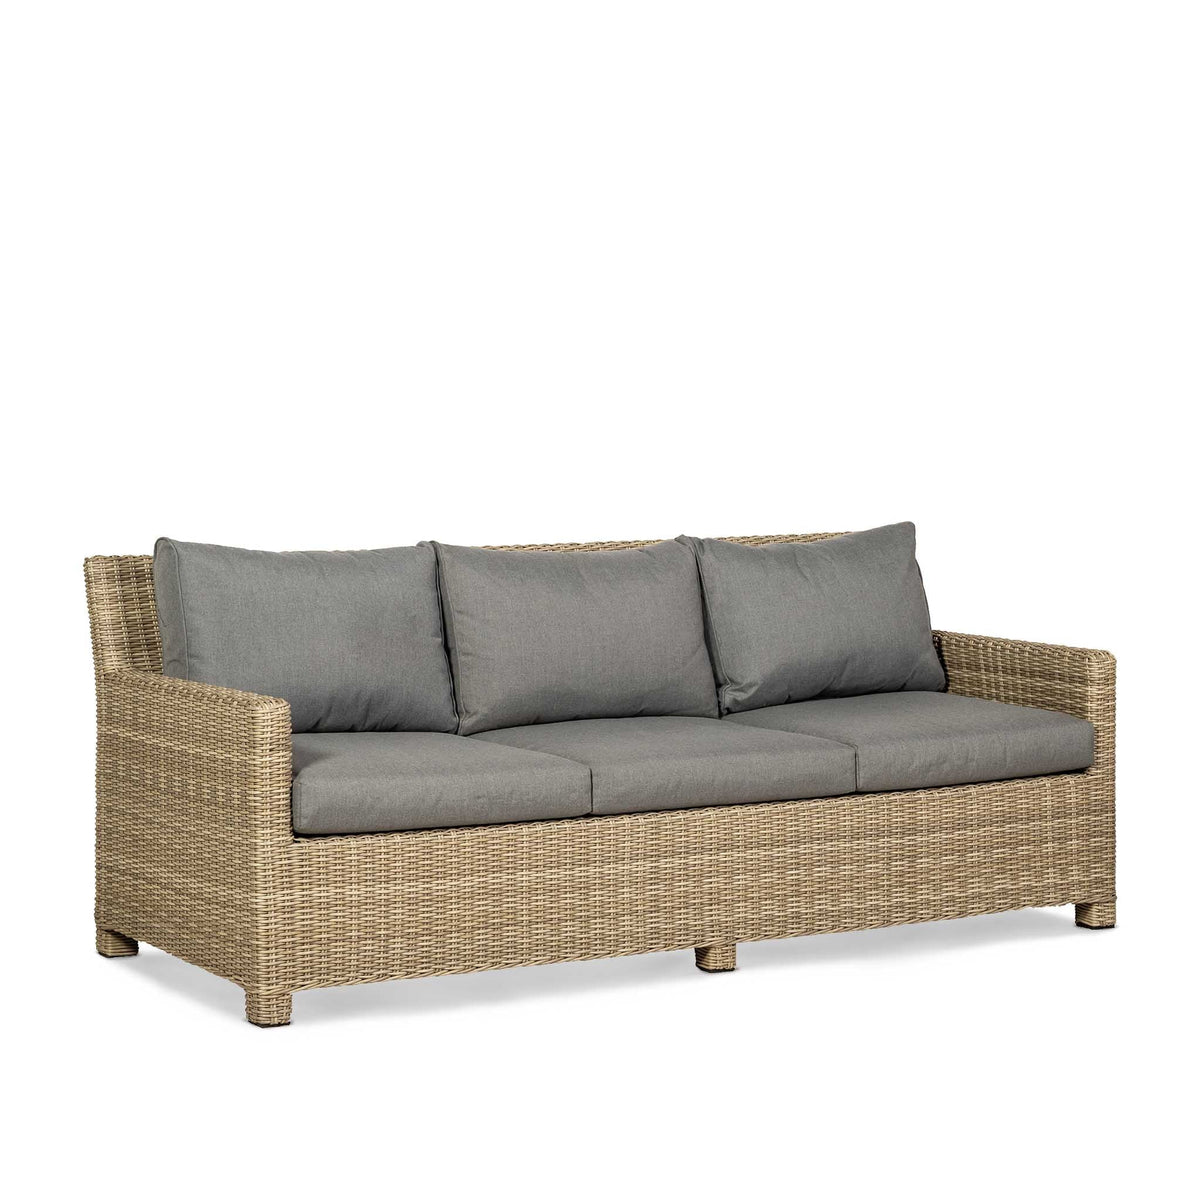 Wentworth Deluxe Rattan Sofa Garden Lounge Set with Adjustable Table - Sofa